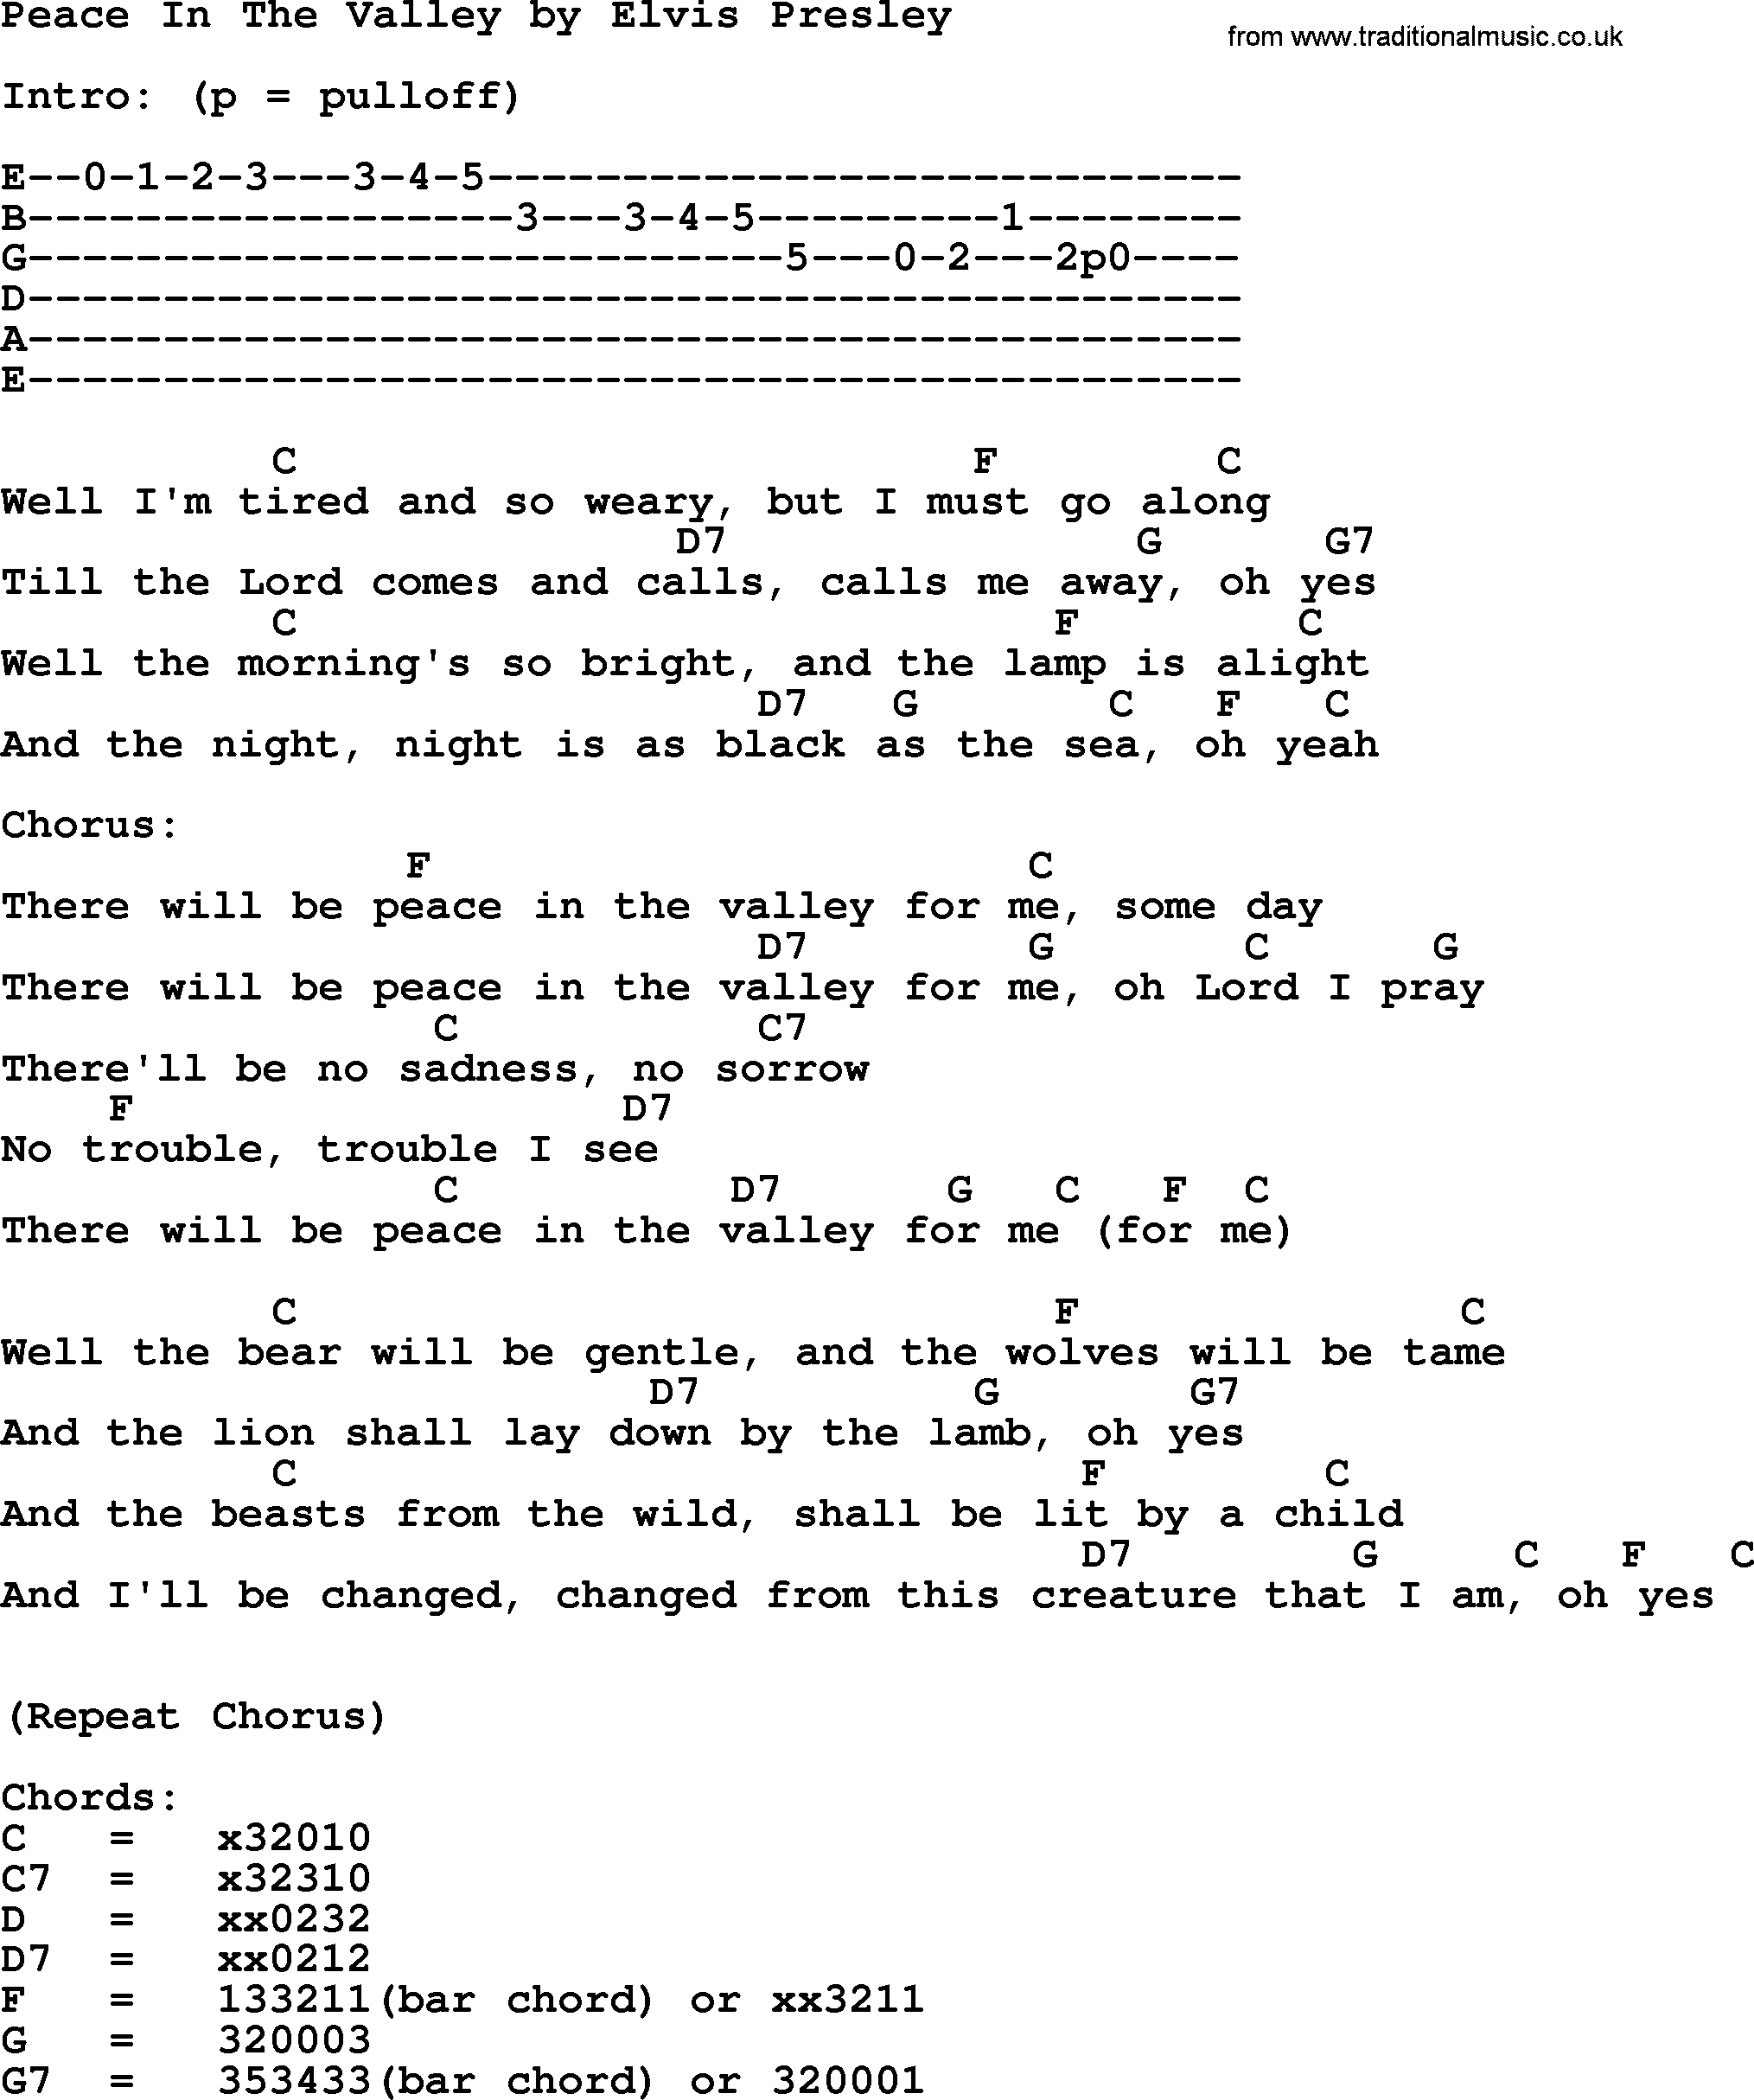 Lion And The Lamb Chords Peace In The Valley Elvis Presley Lyrics And Chords